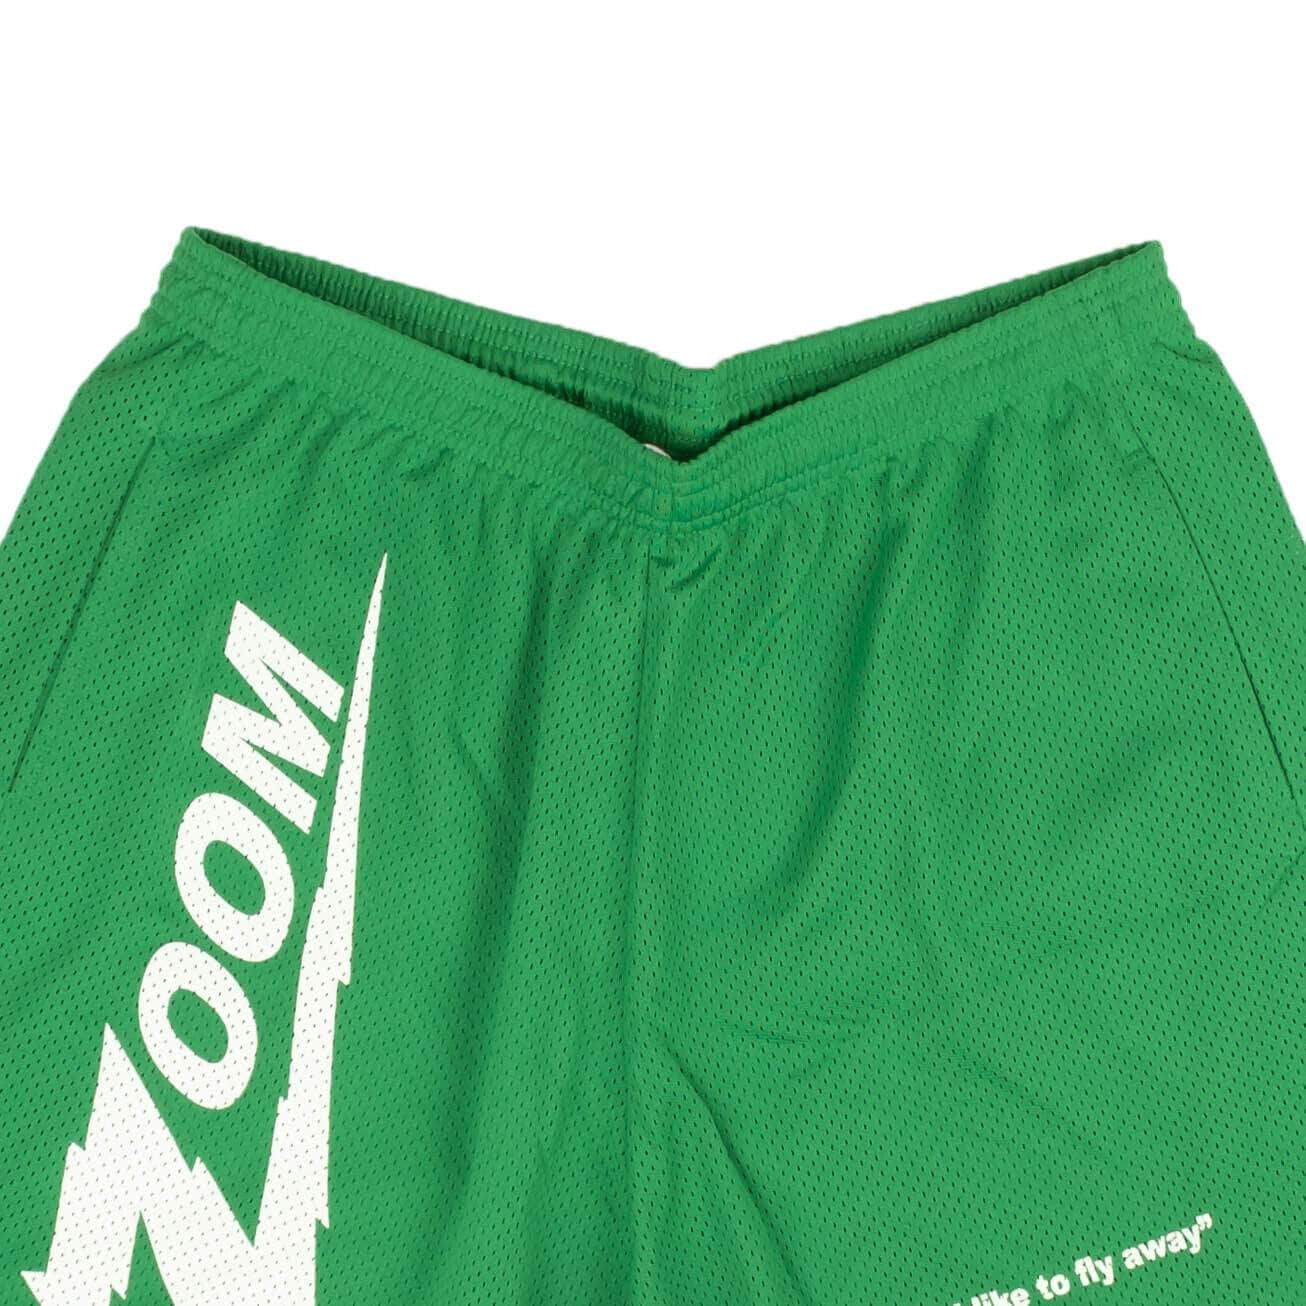 Visitor on Earth channelenable-all, chicmi, couponcollection, gender-mens, main-clothing, mens-shoes, size-l, size-m, size-s, under-250, visitor-on-earth S Green White Logo Mesh Shorts 95-VOE-1014/S 95-VOE-1014/S